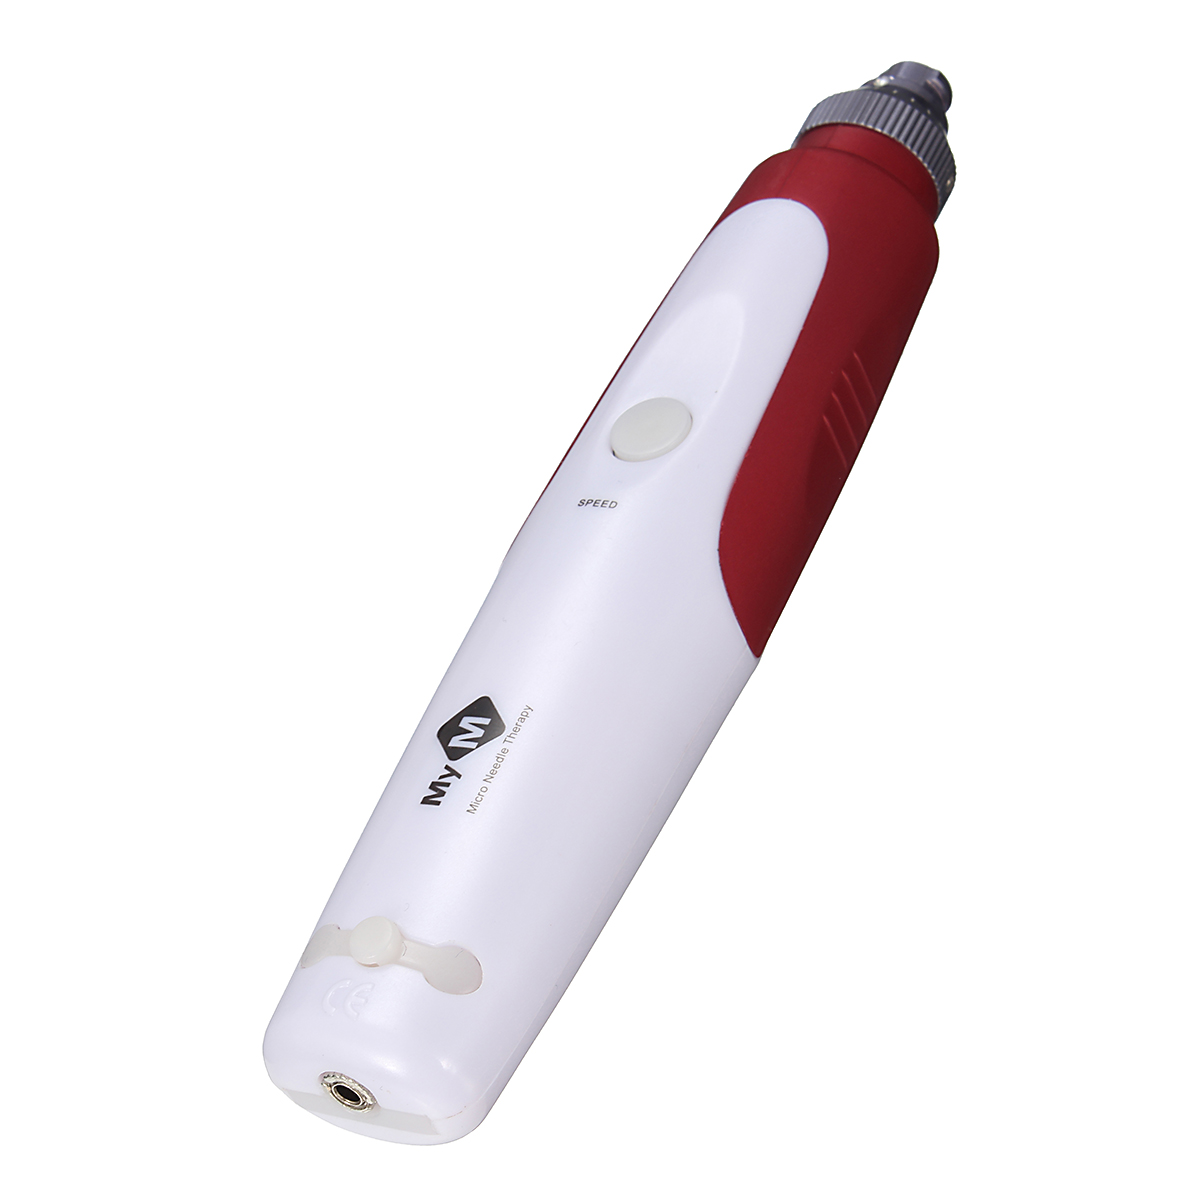 Electric-Auto-Derma-Pen-Micro-Needle-Stamp-Skin-Roller-Anti-Aging-Skin-Care-Facial-Therapy-Tool-1117410